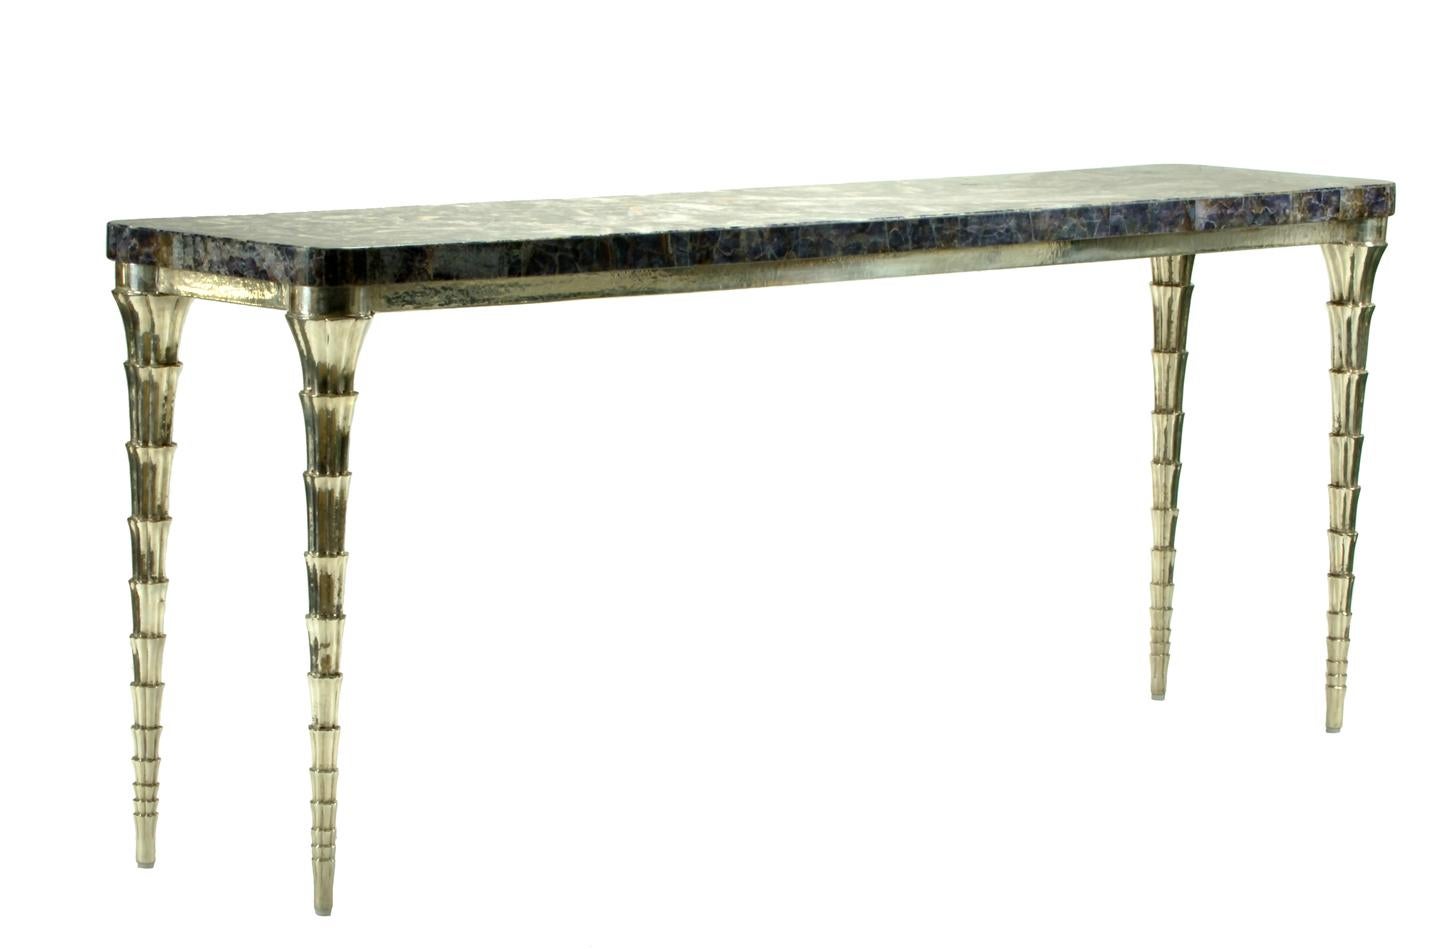 Cornet table designed by Paul Mathieu for the Stephanie Odegard Co. Ltd. Jewelry for the home, this hand carved teak console table is clad in metal and adorned with an amethyst mosaic top. The CORNET table named for the elements of the legs named